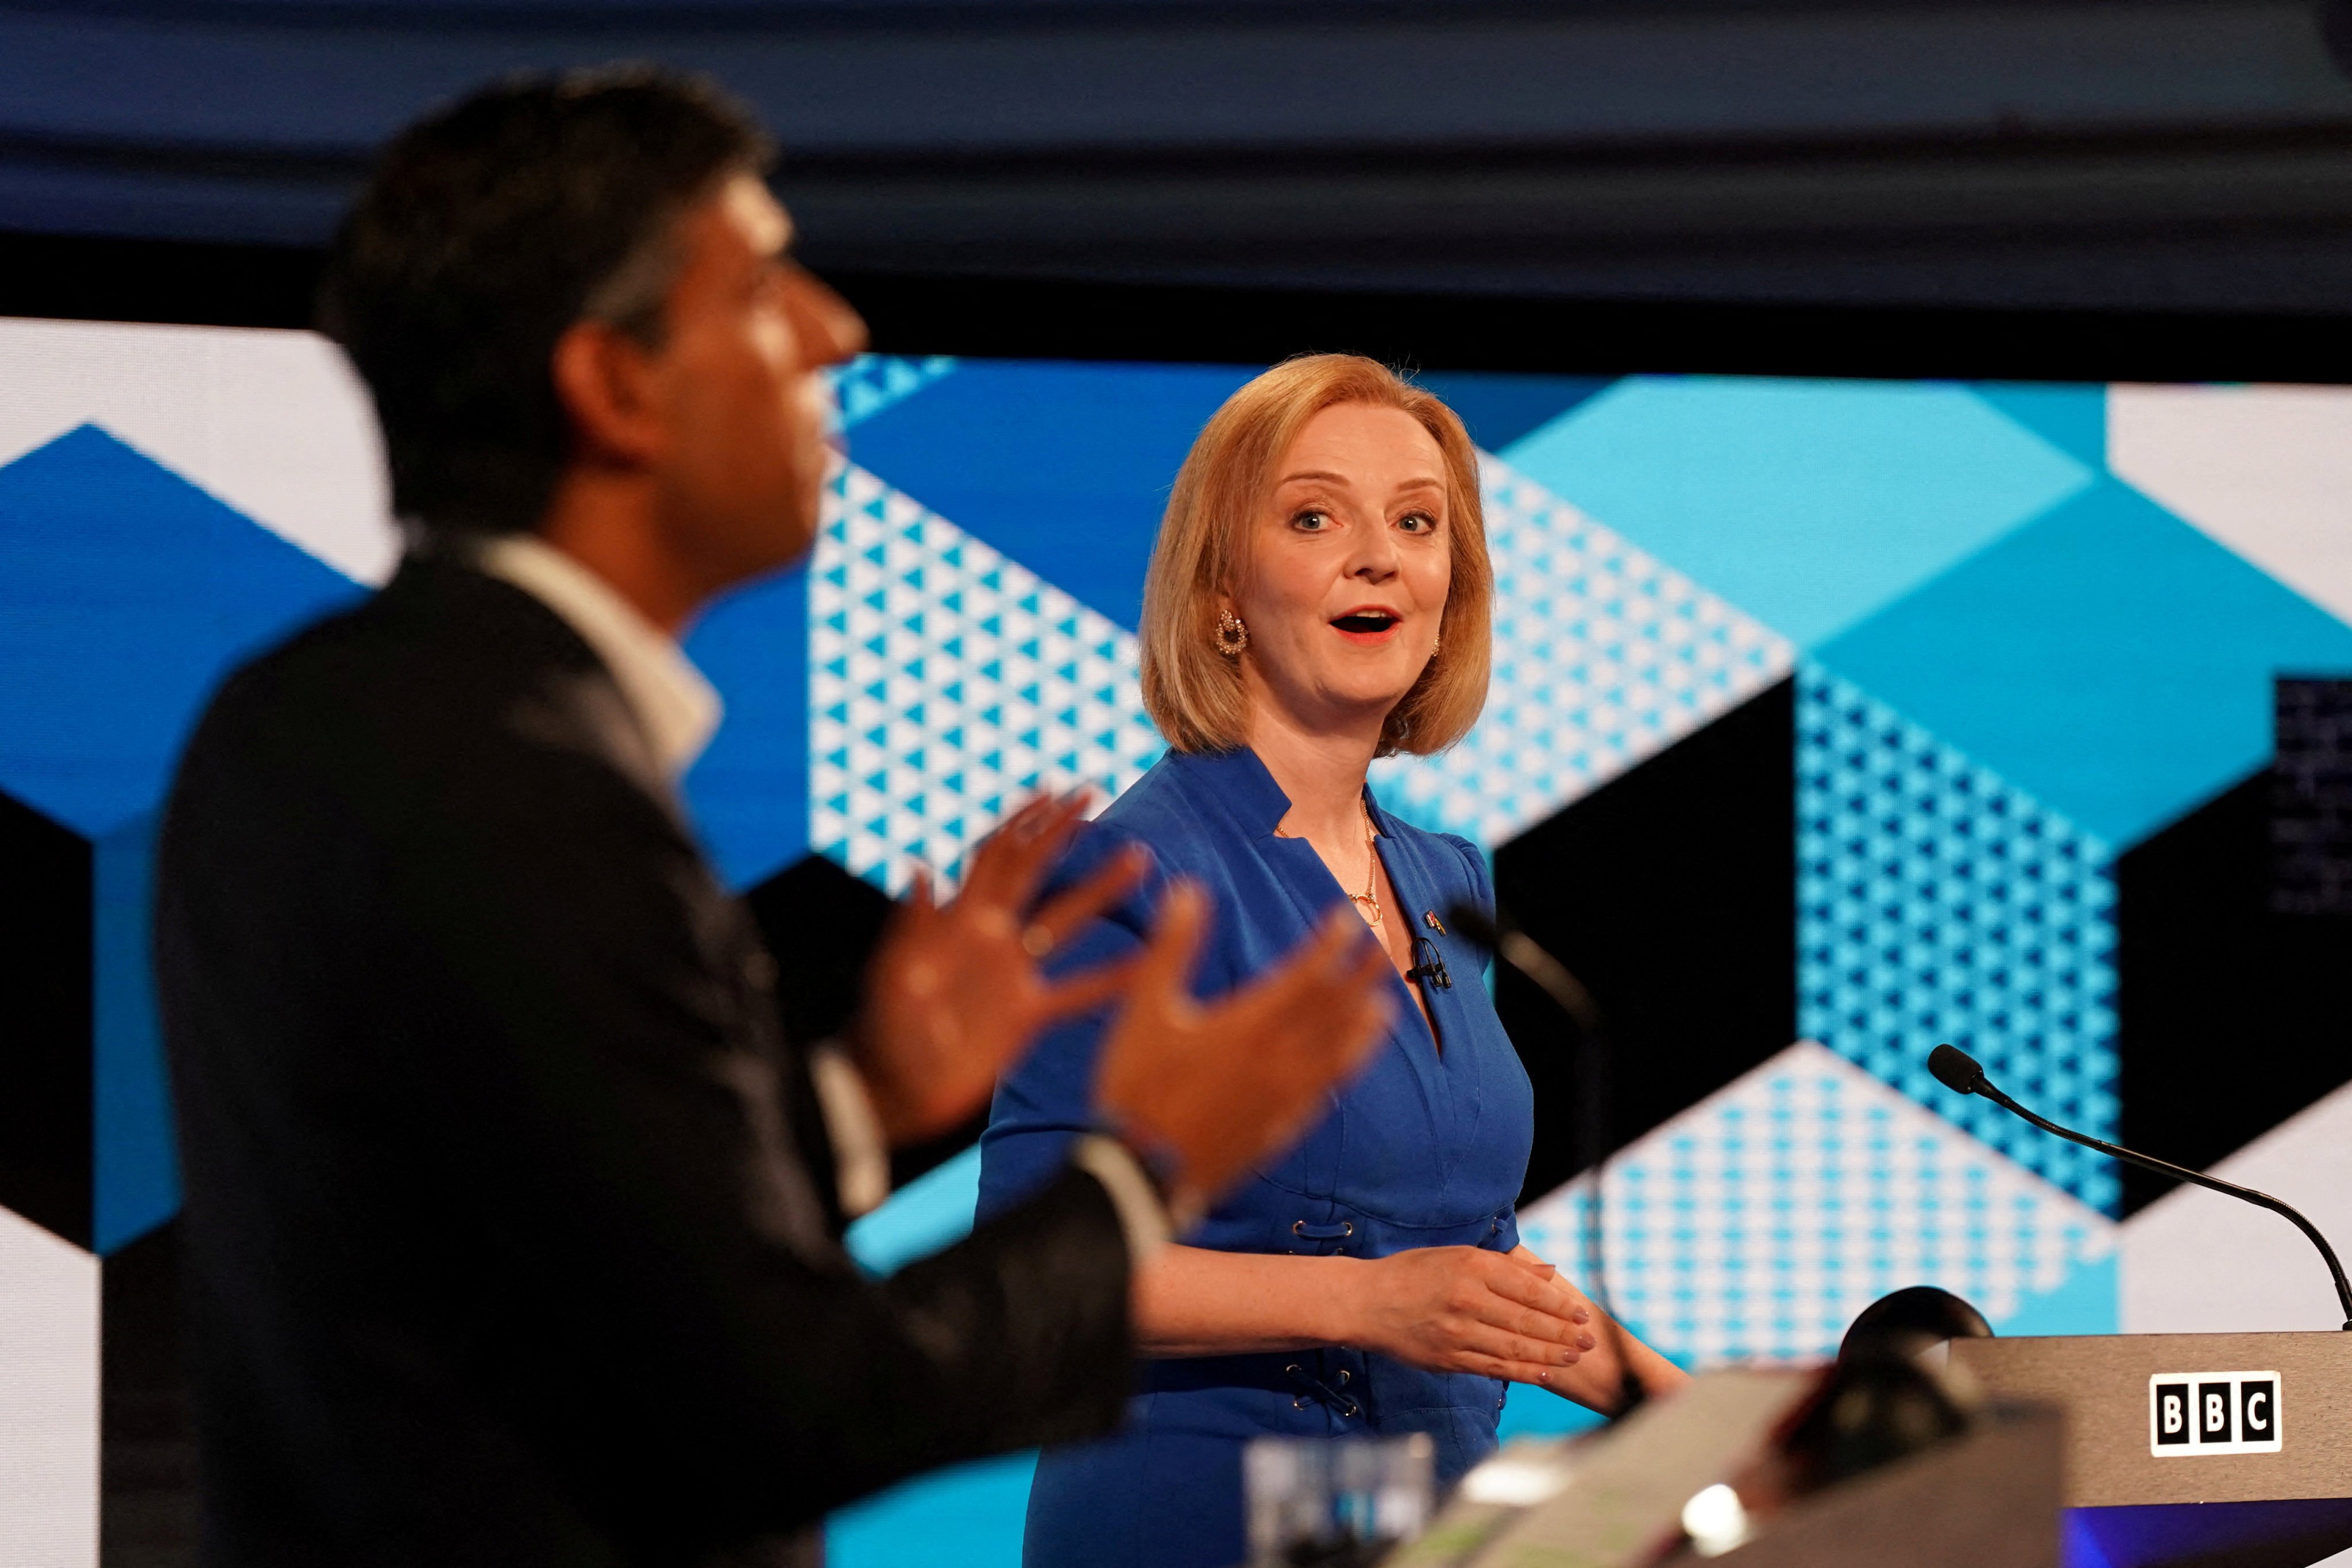 Candidates Rishi Sunak and Liz Truss take part in the BBC Conservative Party leadership debate at Victoria Hall in Hanley, Stoke-on-Trent, Britain, on July 25. Photo: Reuters